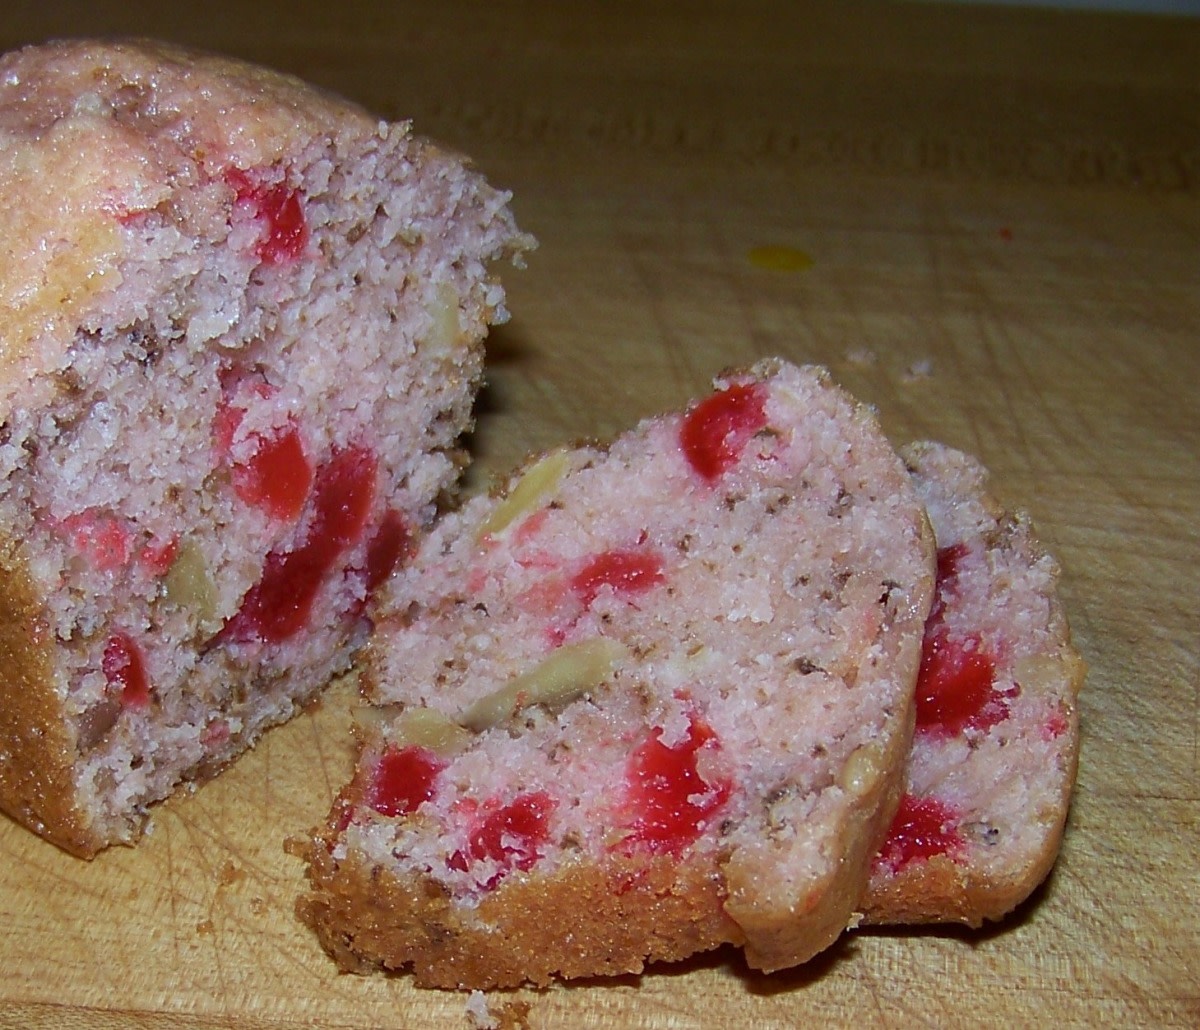 This cherry nut bread has only 94 calories per serving!